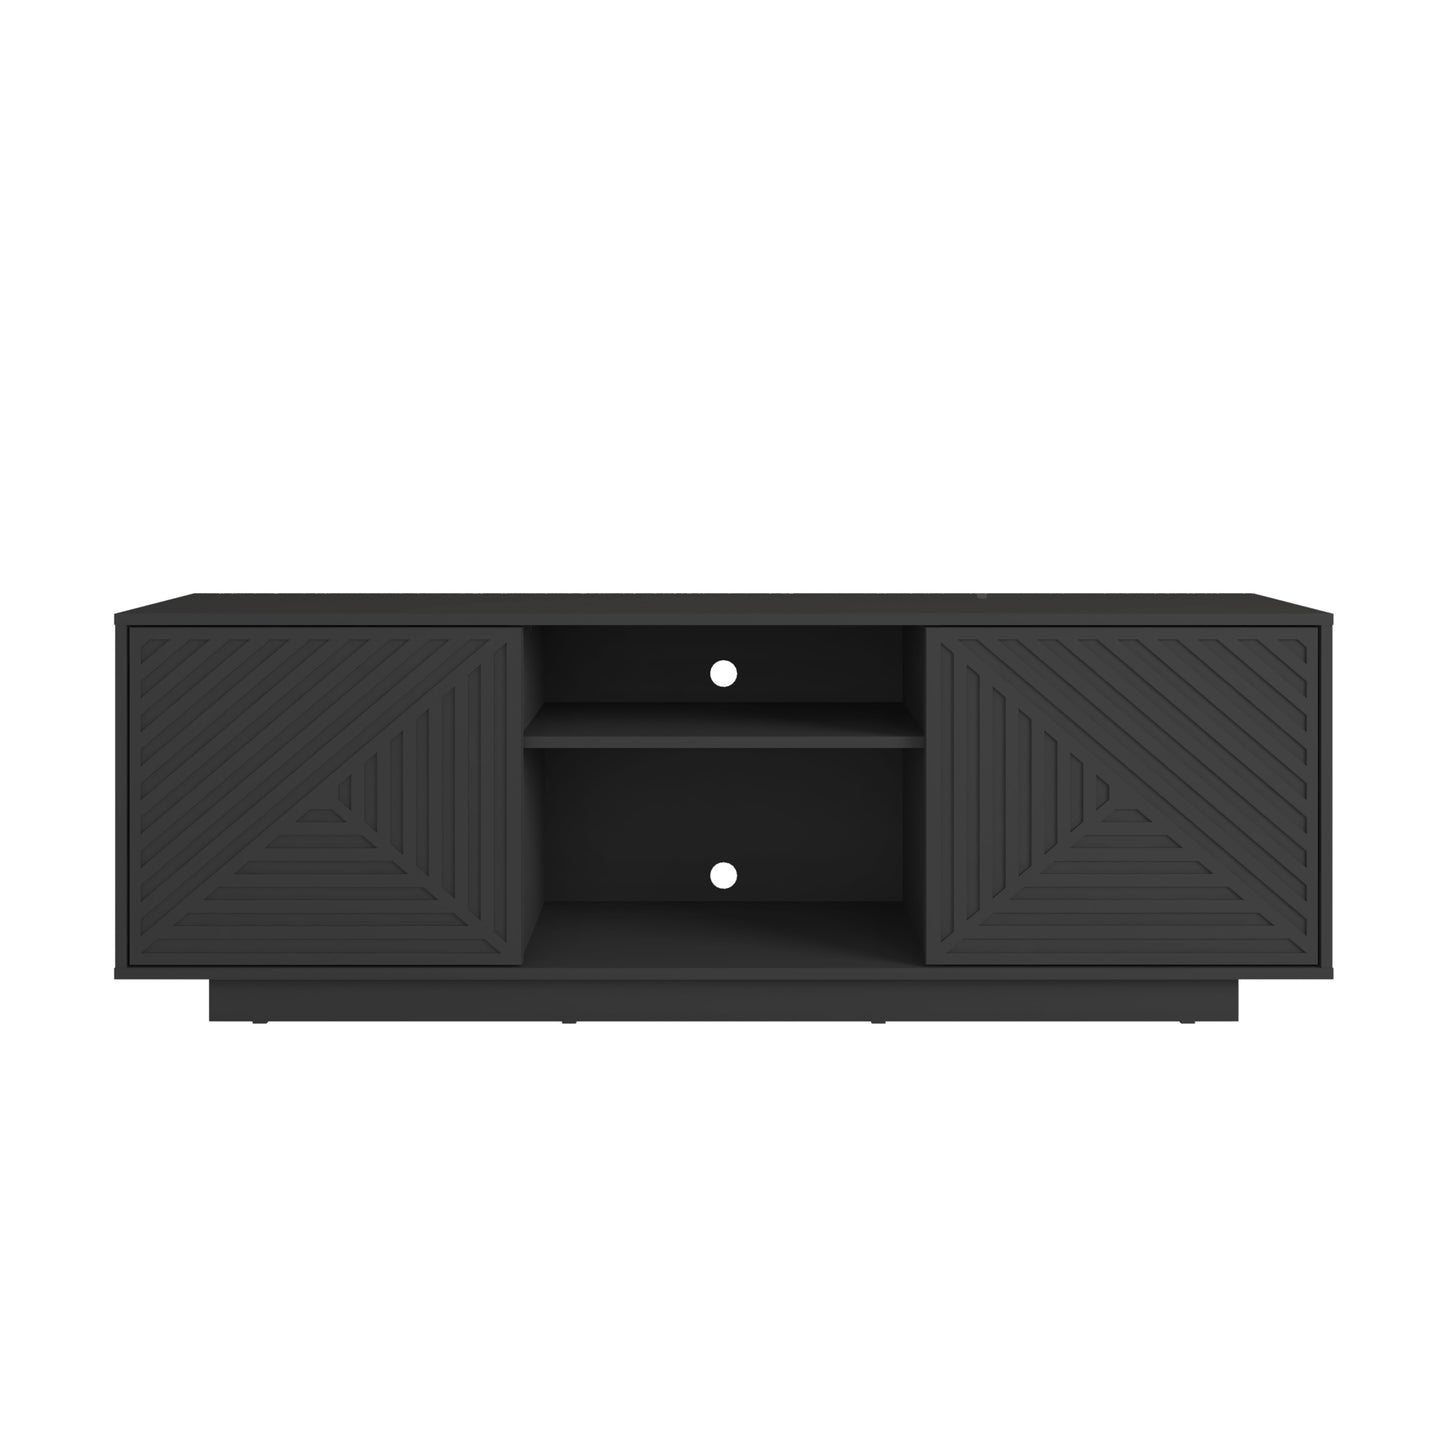 Techni Mobili Modern TV Stand for TVs Up to 70", Black